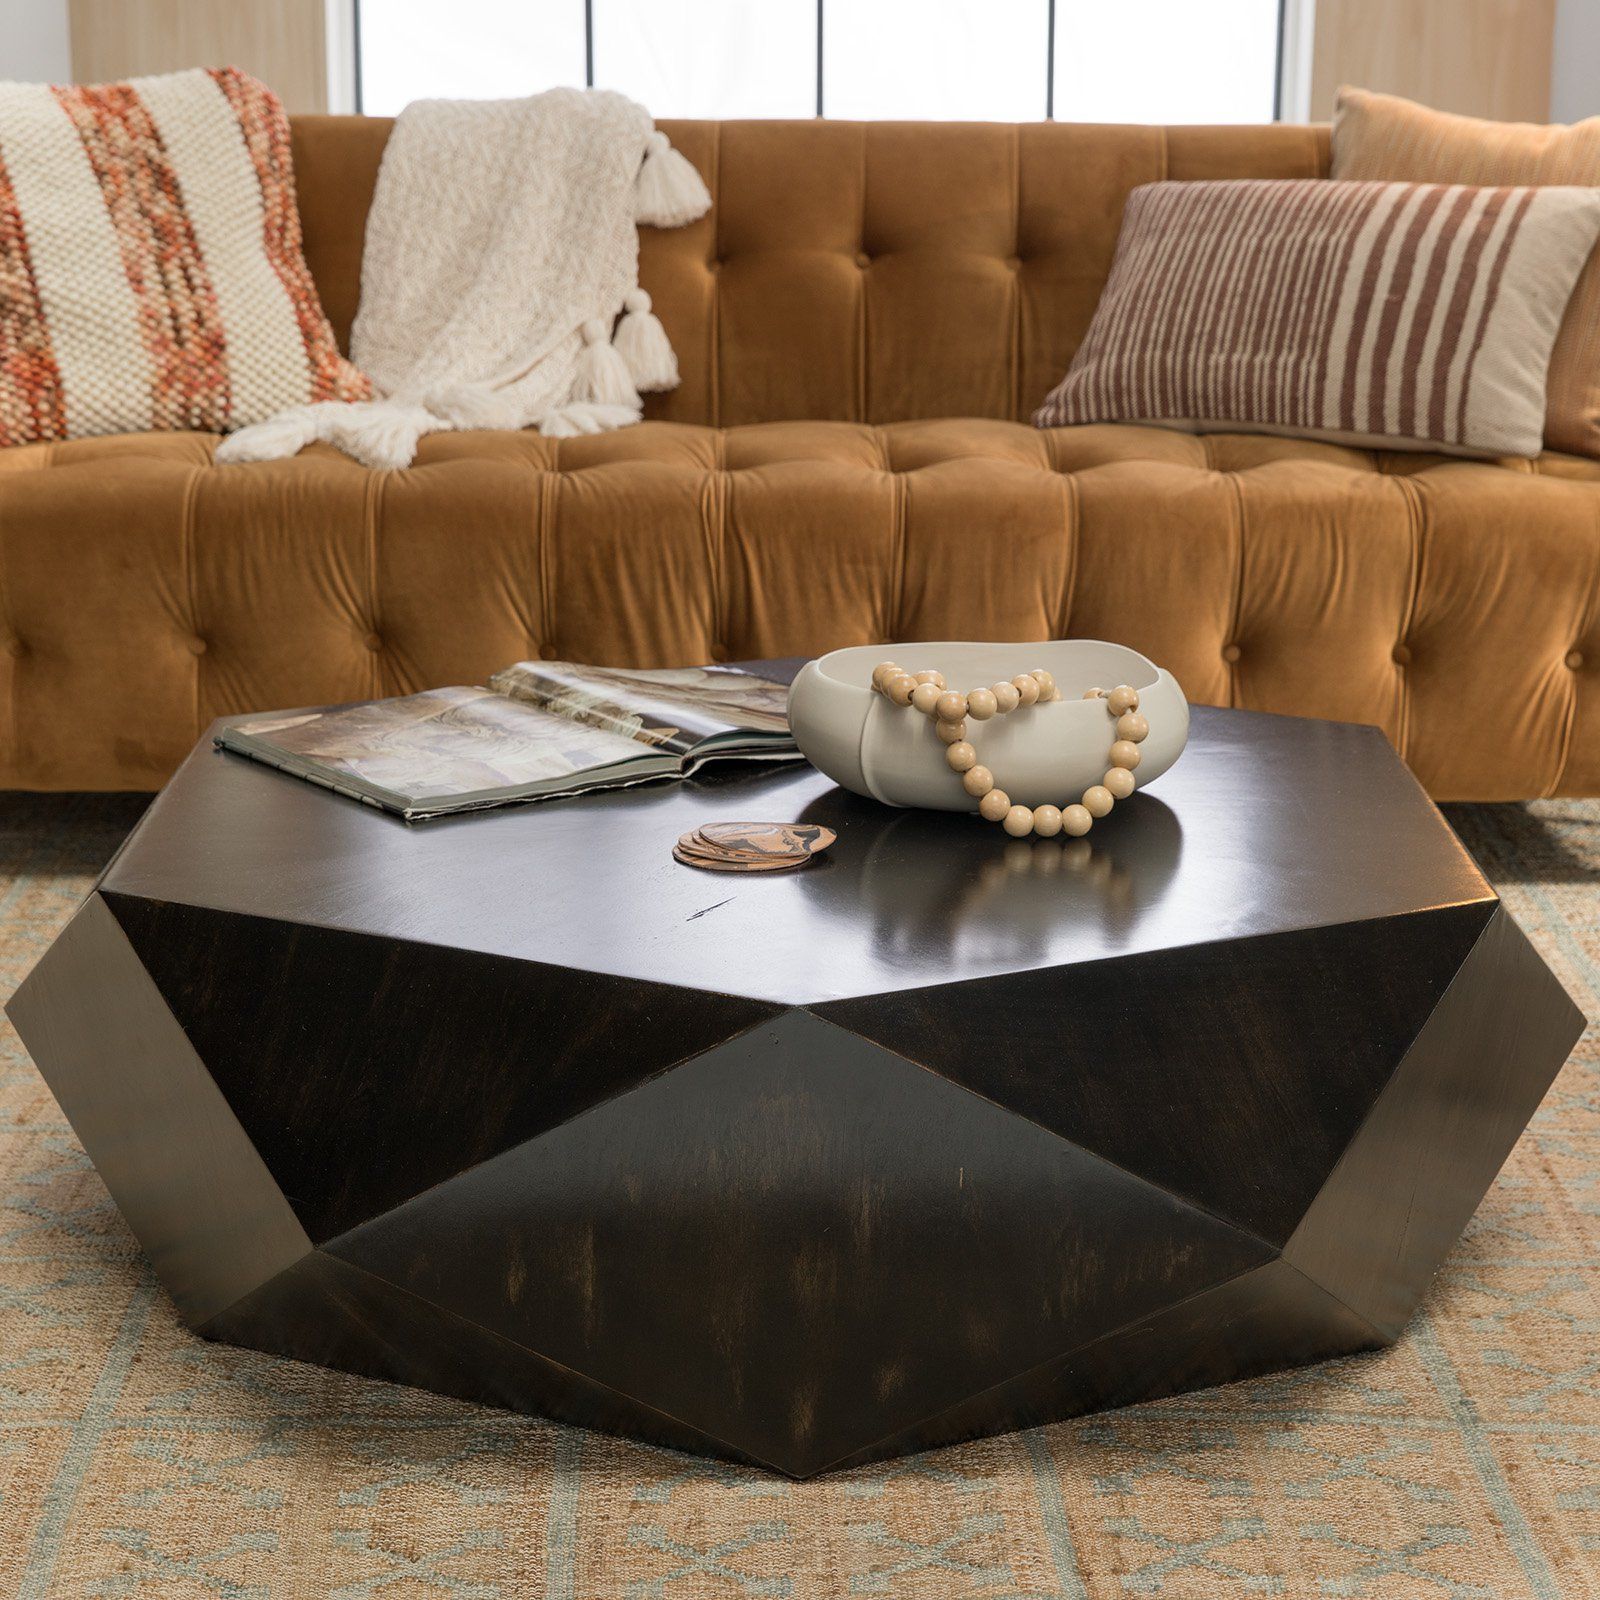 Faceted Large Geometric Coffee Table Round Black Wood Modern Block In Coffee Tables With Solid Legs (View 15 of 20)